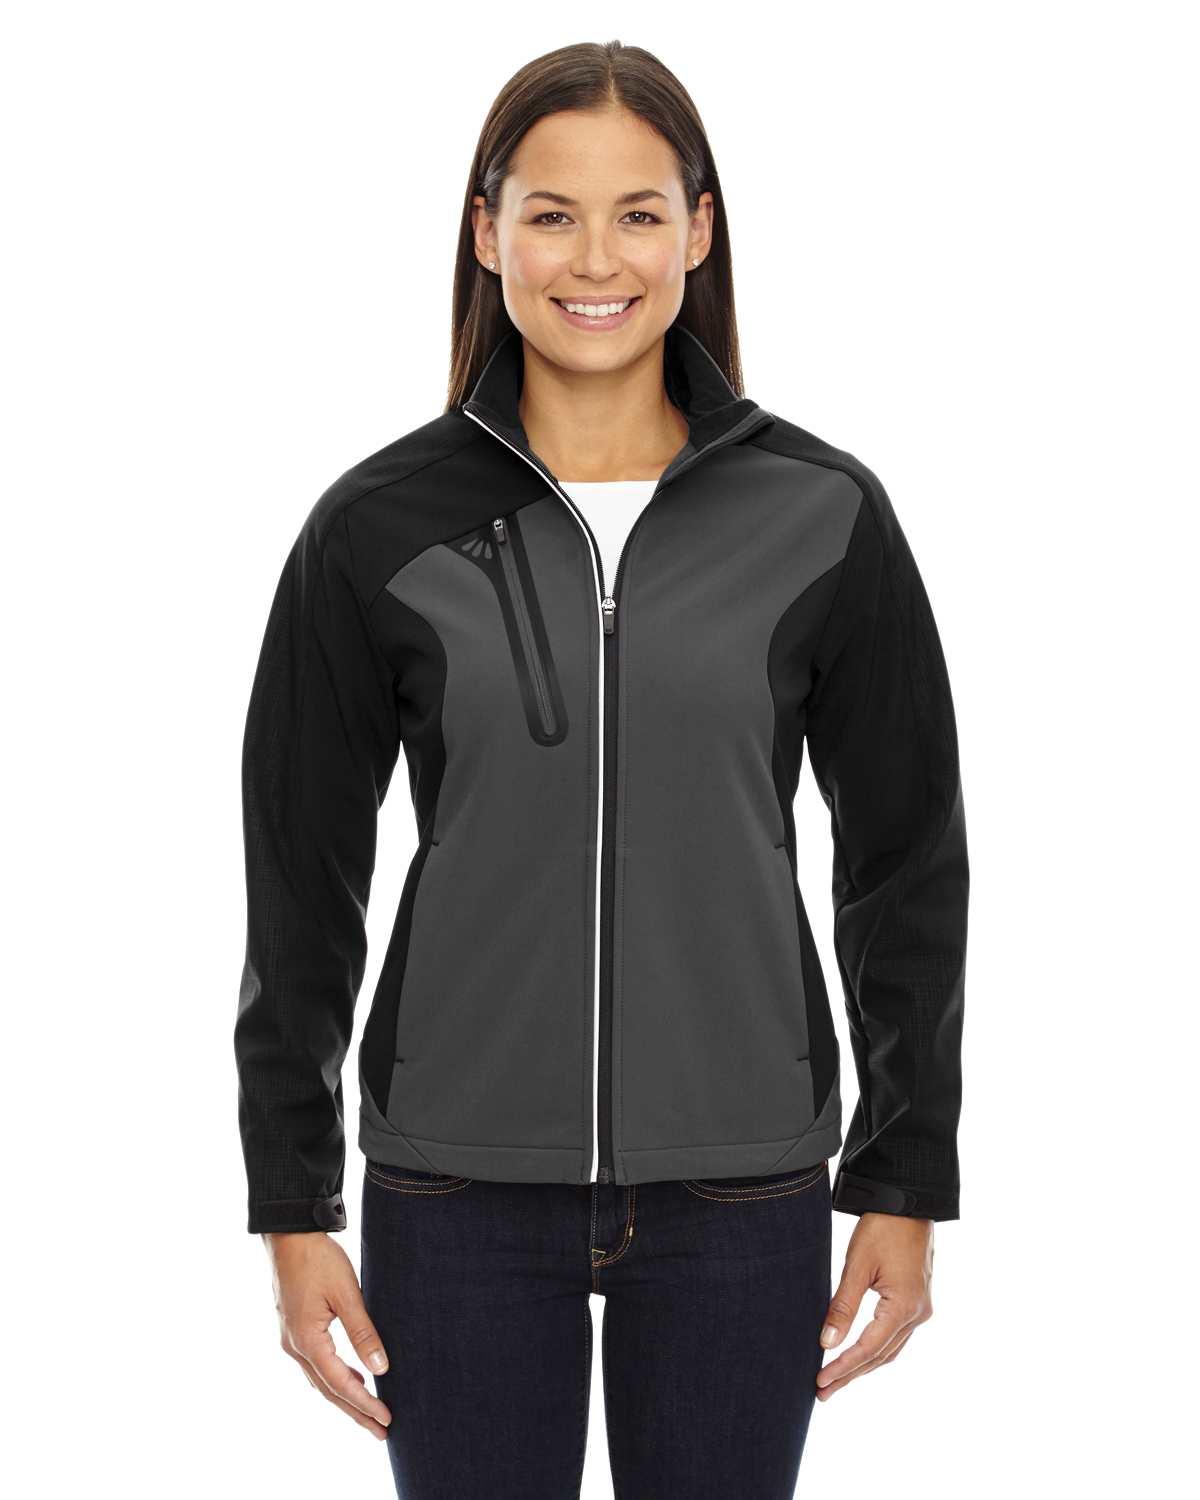 The Ash City - North End Ladies' Terrain Colorblock Soft Shell with Embossed Print - BLKSILK 866 - L - image 1 of 1